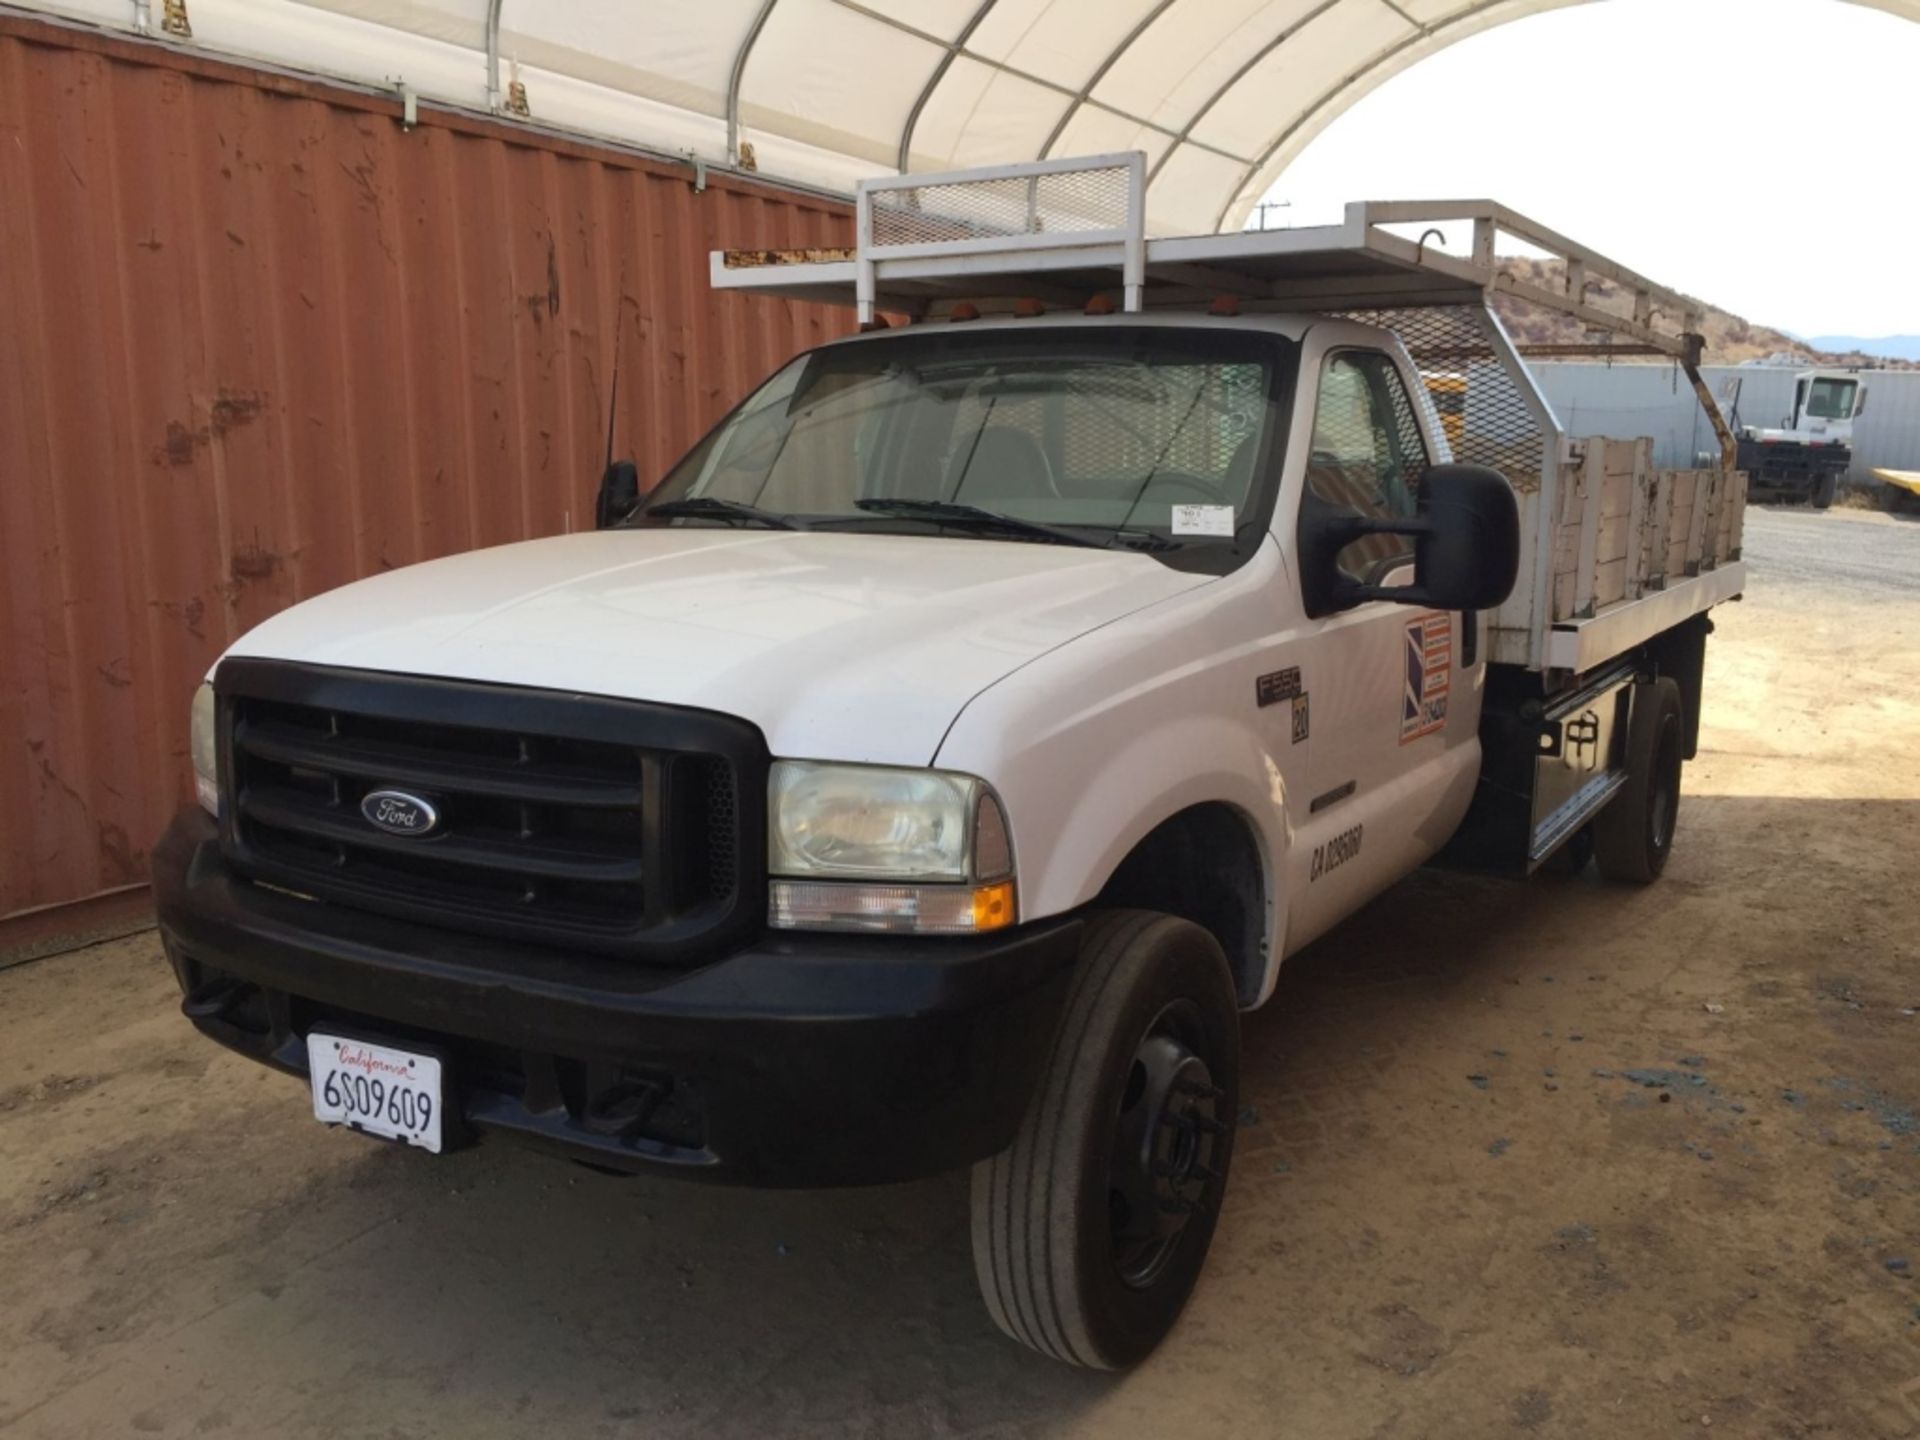 Ford F550 Flatbed Dump Truck, - Image 5 of 72